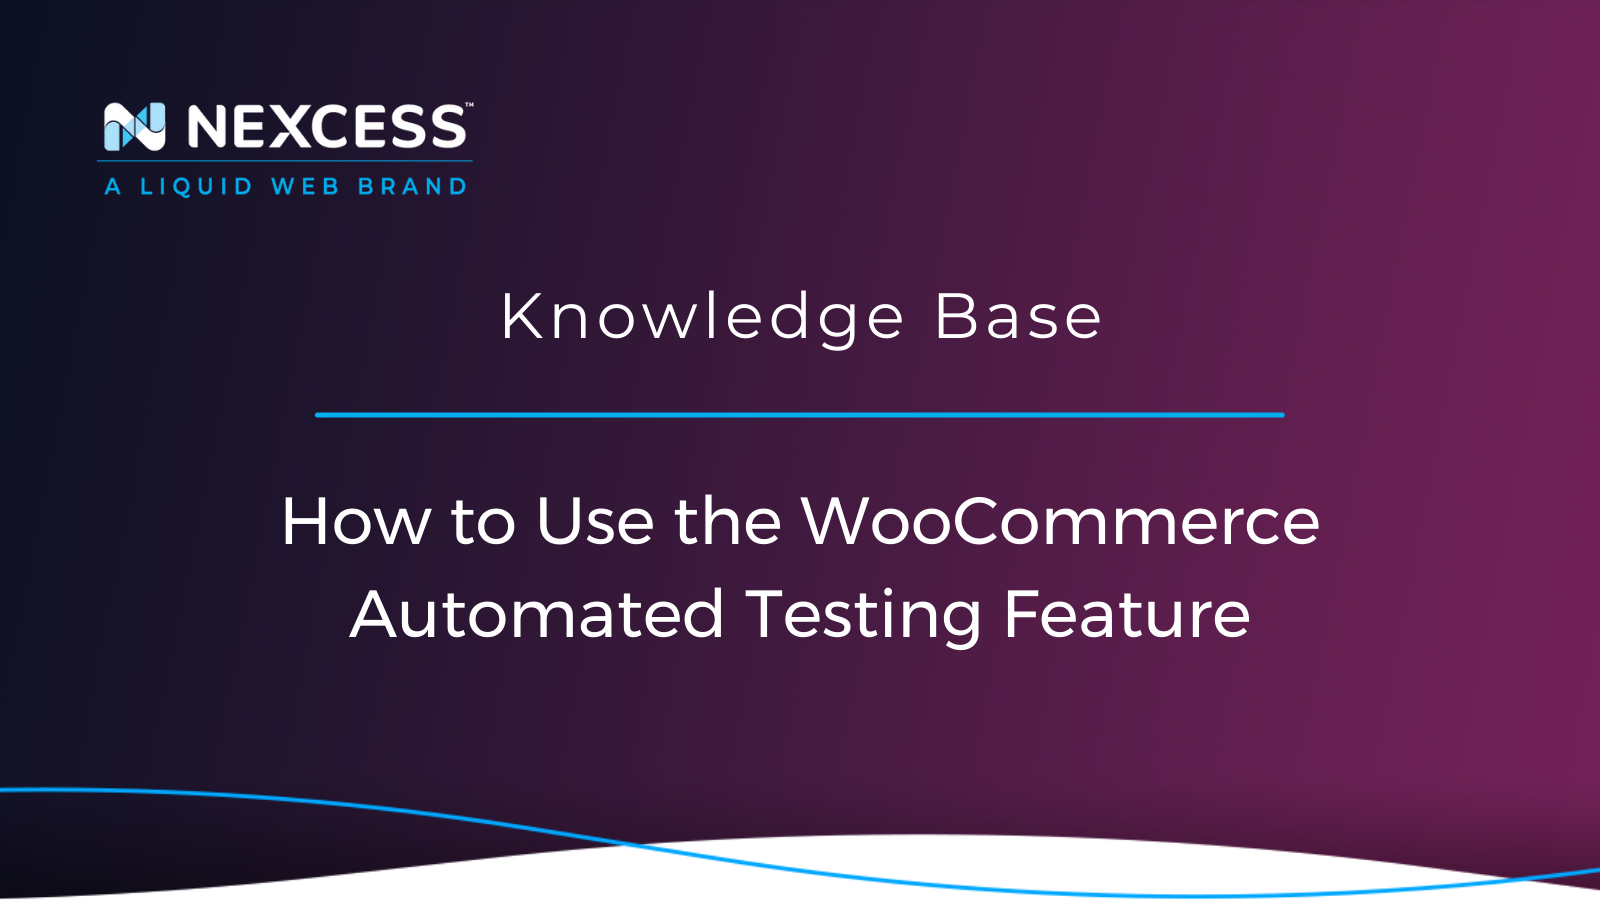 How to Use the WooCommerce Automated Testing Feature